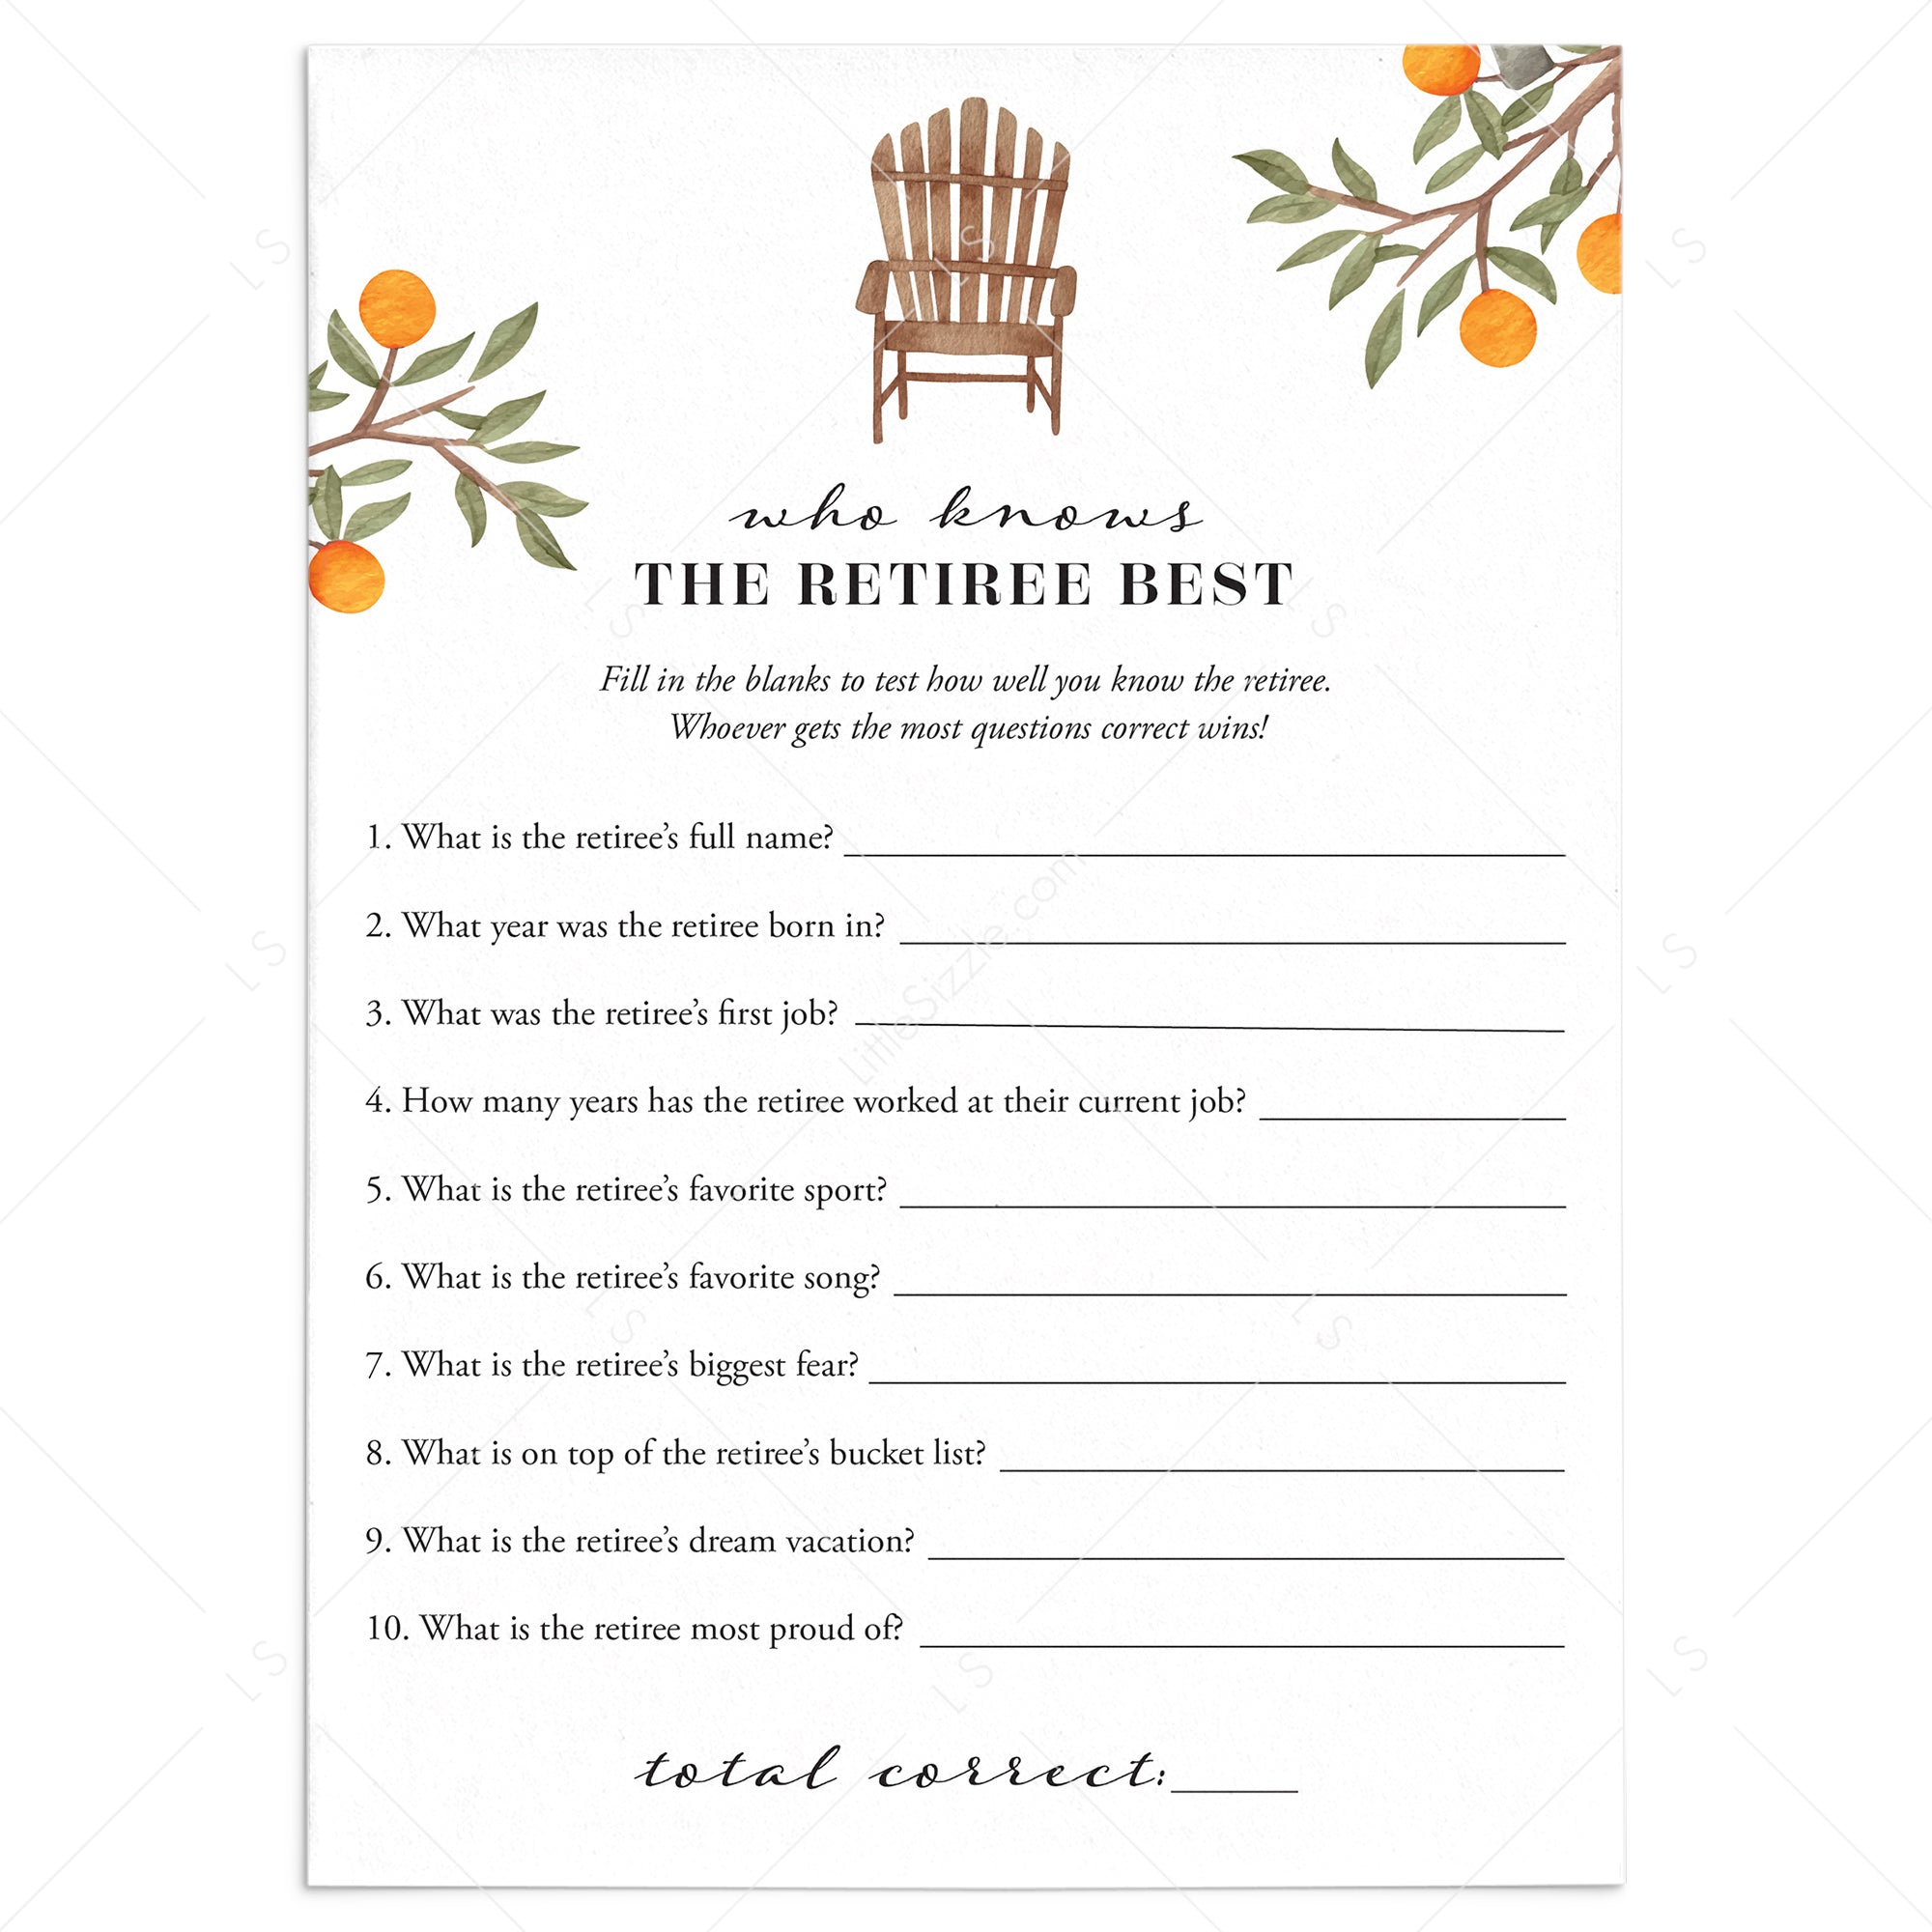 Retirement party game who knows the retiree best printable â